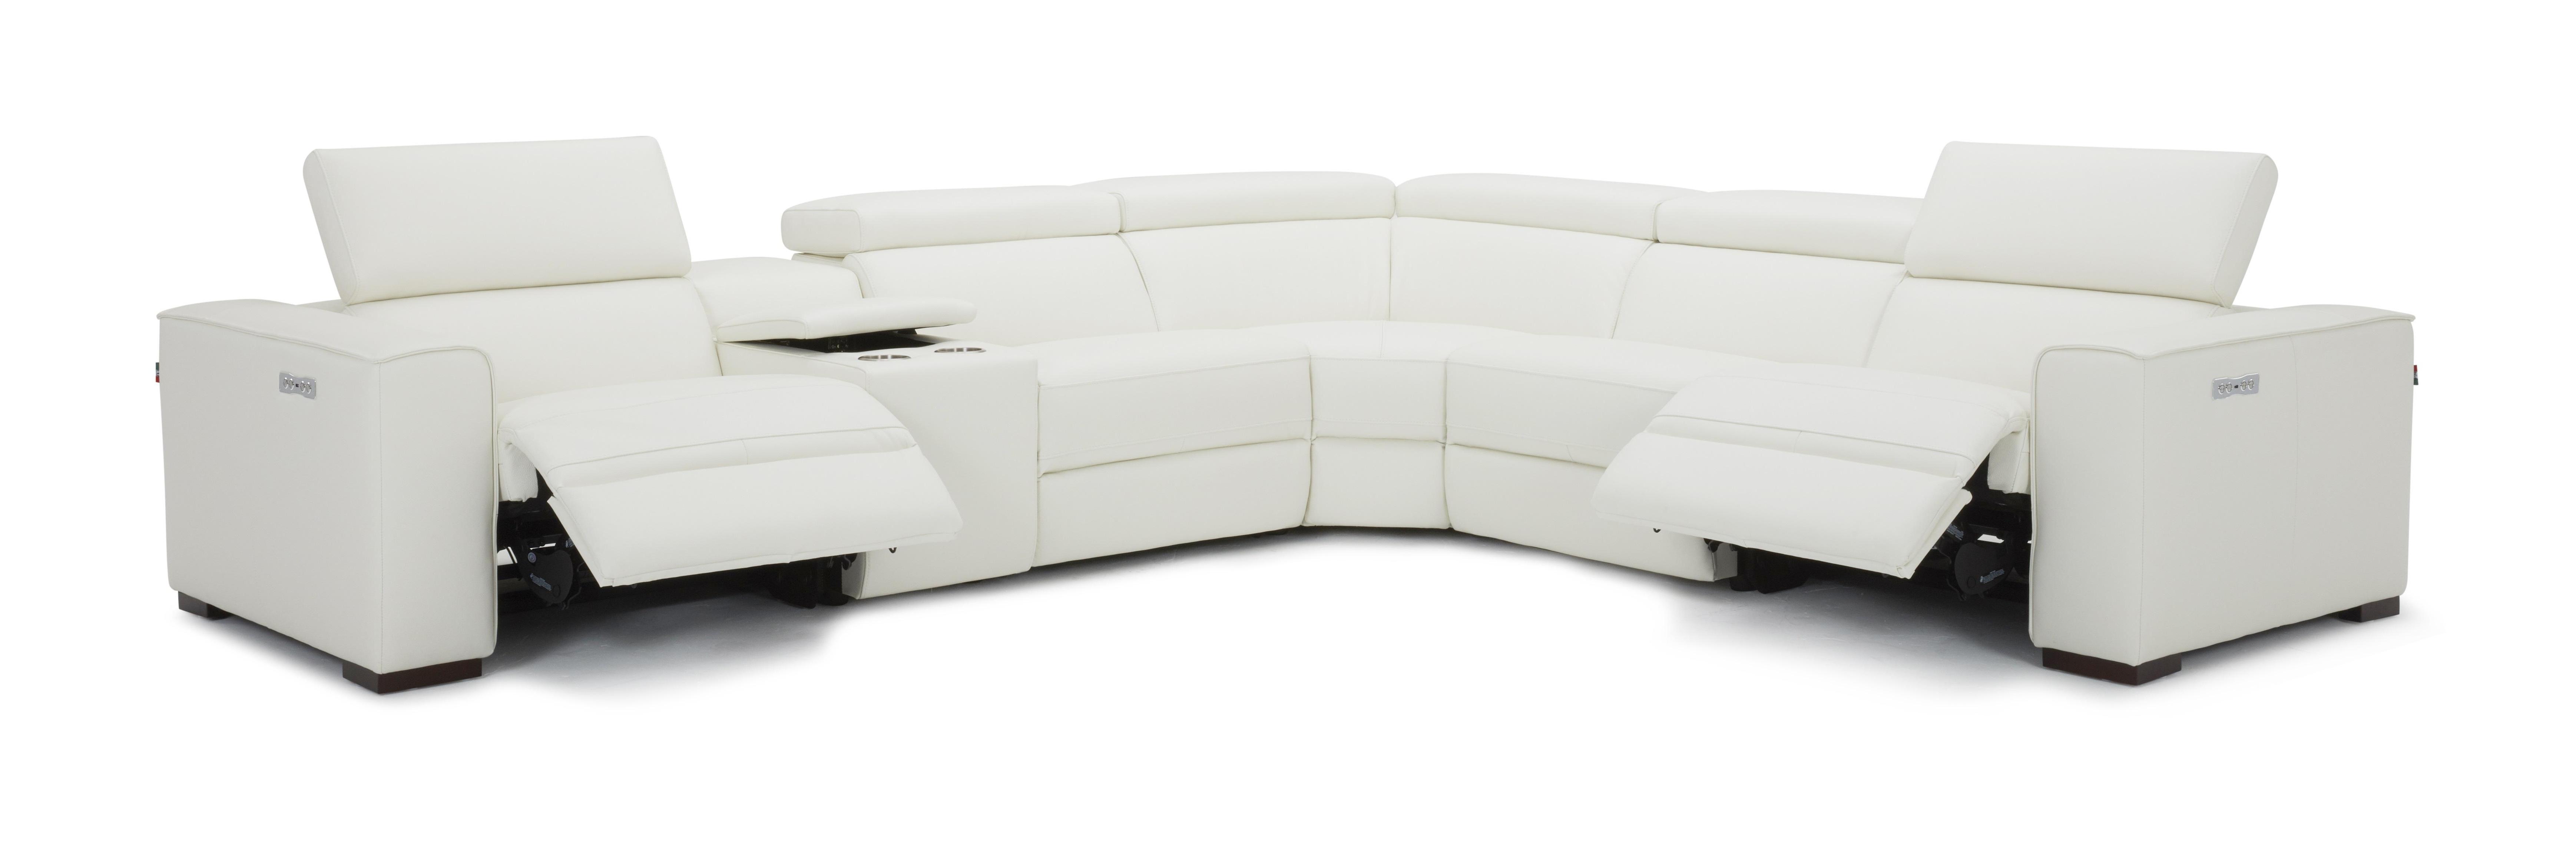 Contemporary Reclining Sectional Picasso SKU18865-W in White Top grain leather